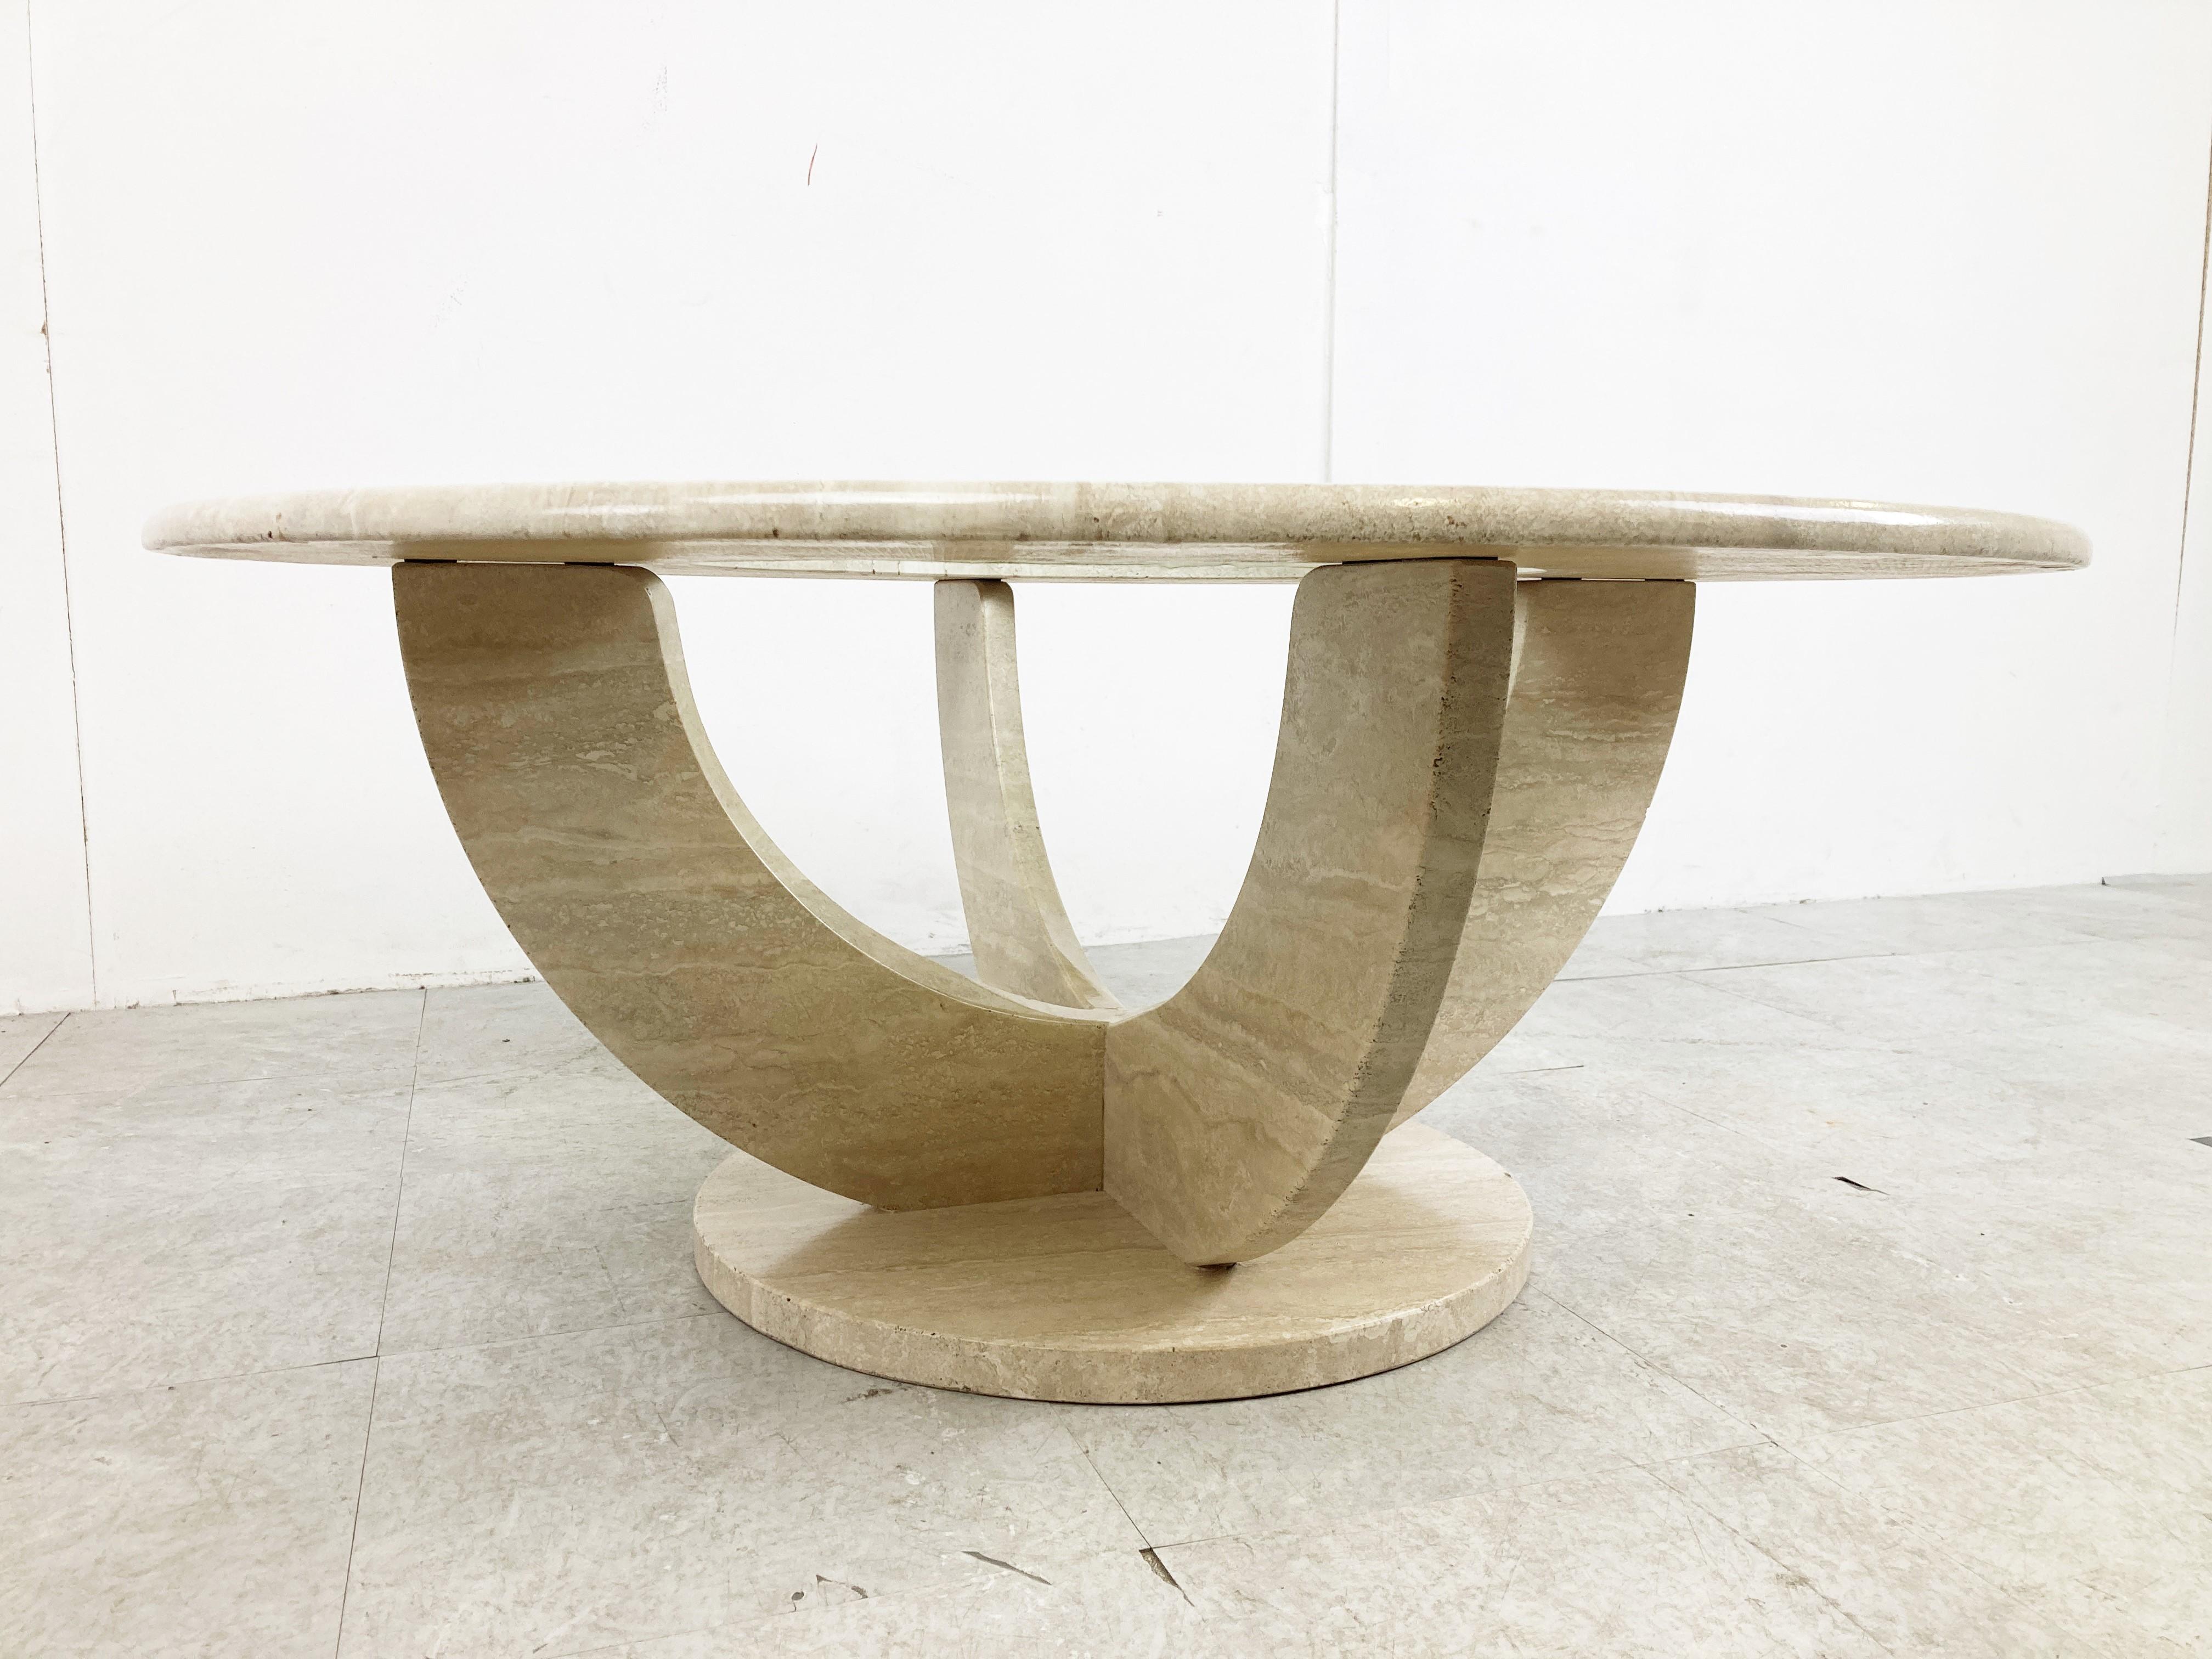 Vintage round travertine coffee table with a nicely shaped base and a glass and travertine round top. 

Good condition.

1970s - Italy

Dimensions
Height: 42cm/16.53